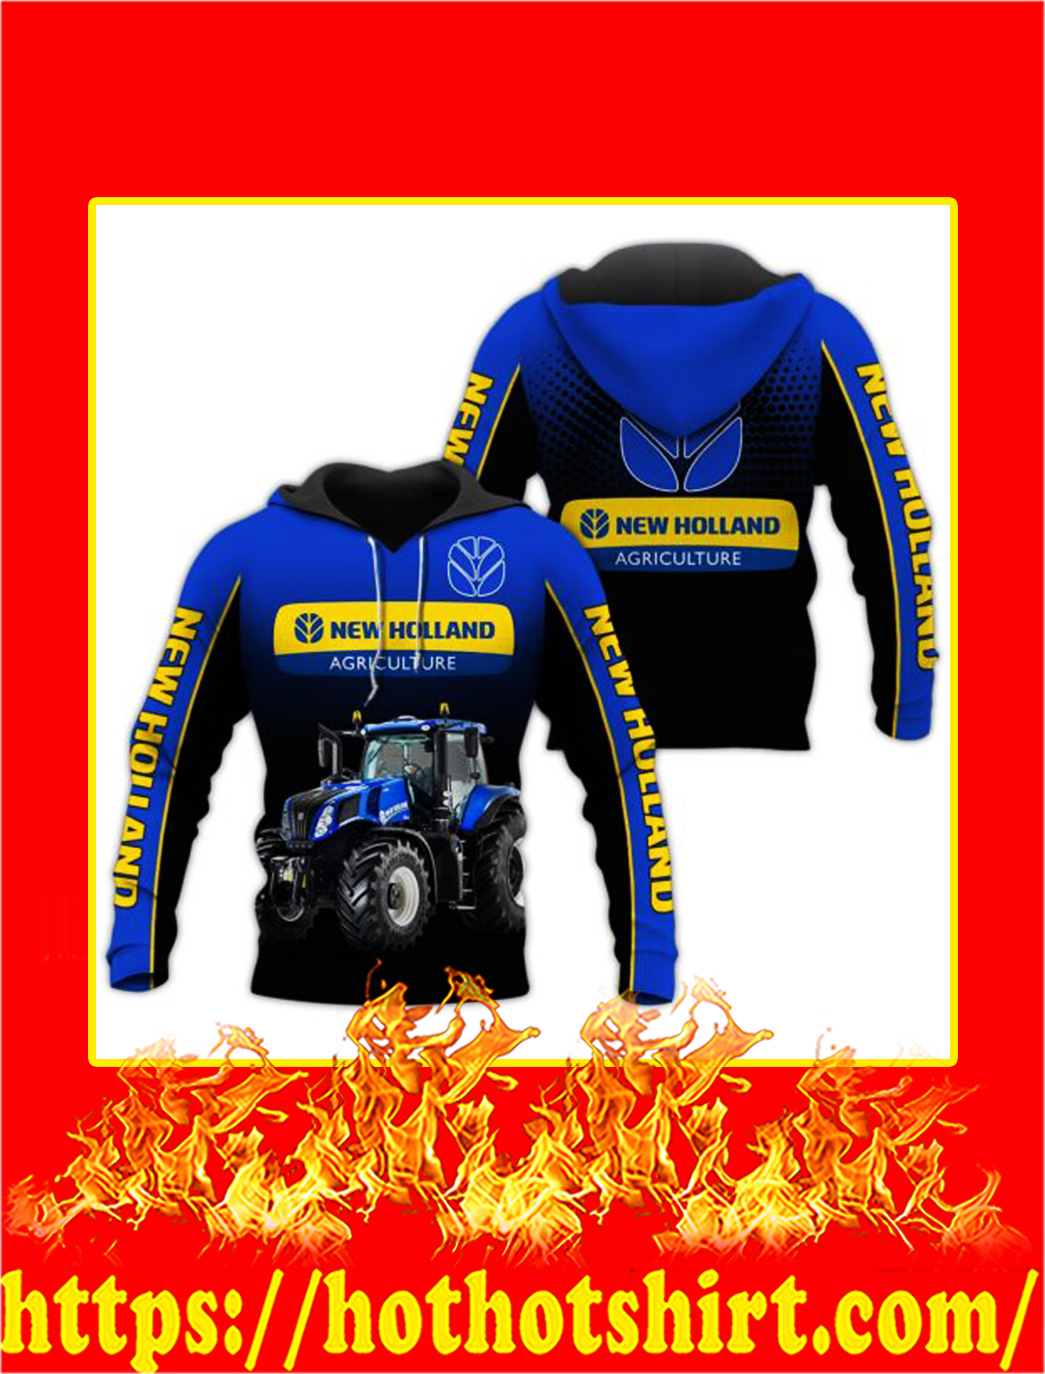 Tractor New Holland Agriculture 3D All Over Printed hoodie, shirt